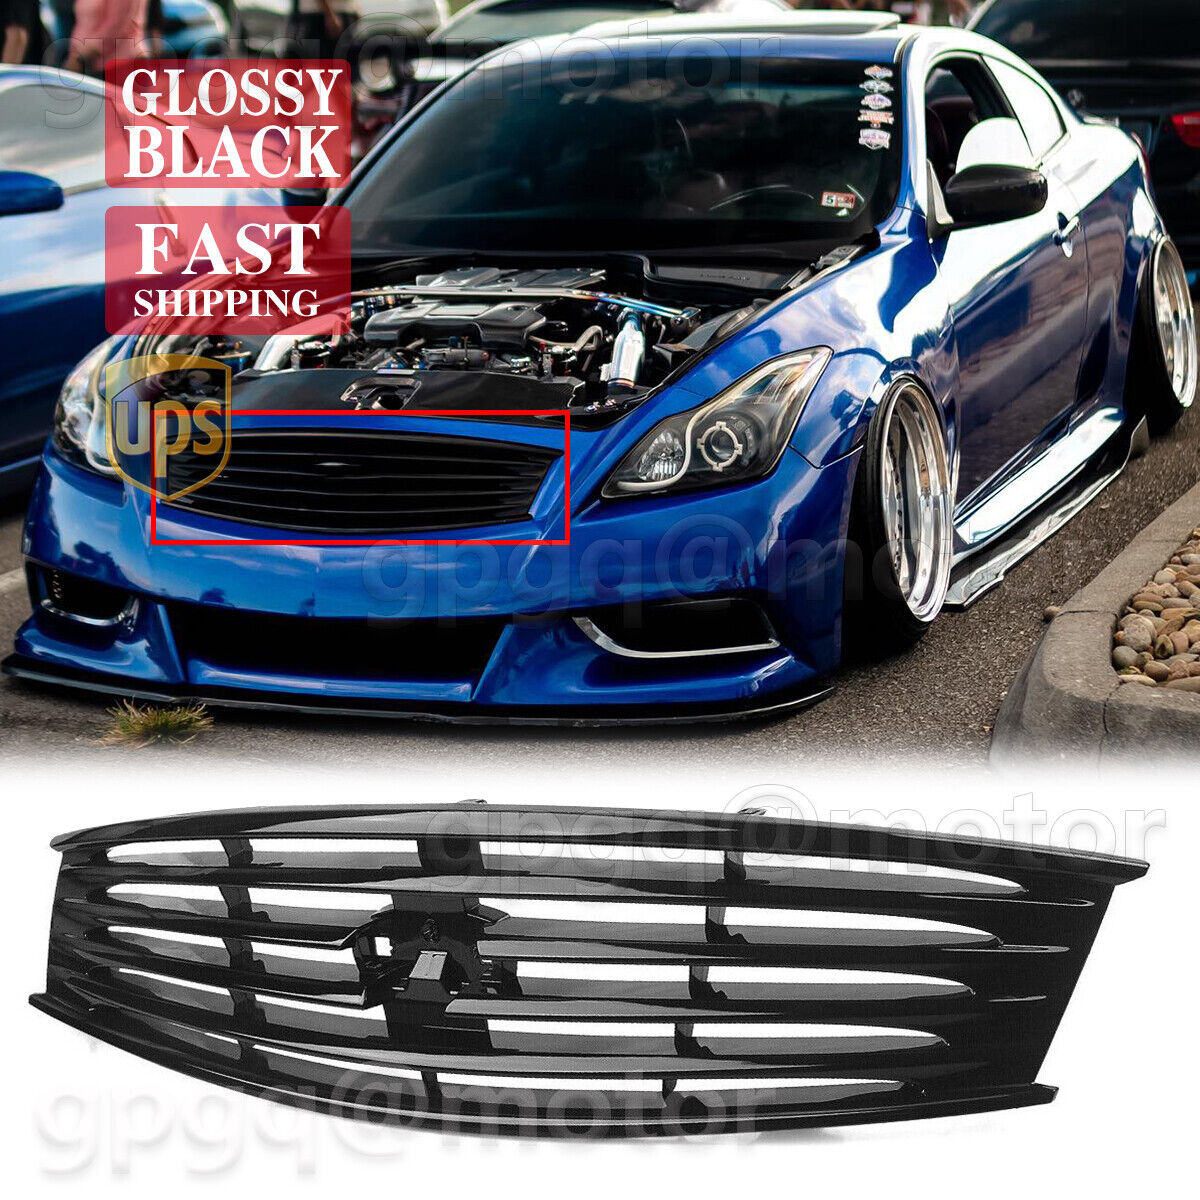 For Infiniti G37 2008-13 Q60 14-15 Coupe 2 Door Glossy Black Front Bumper Grille